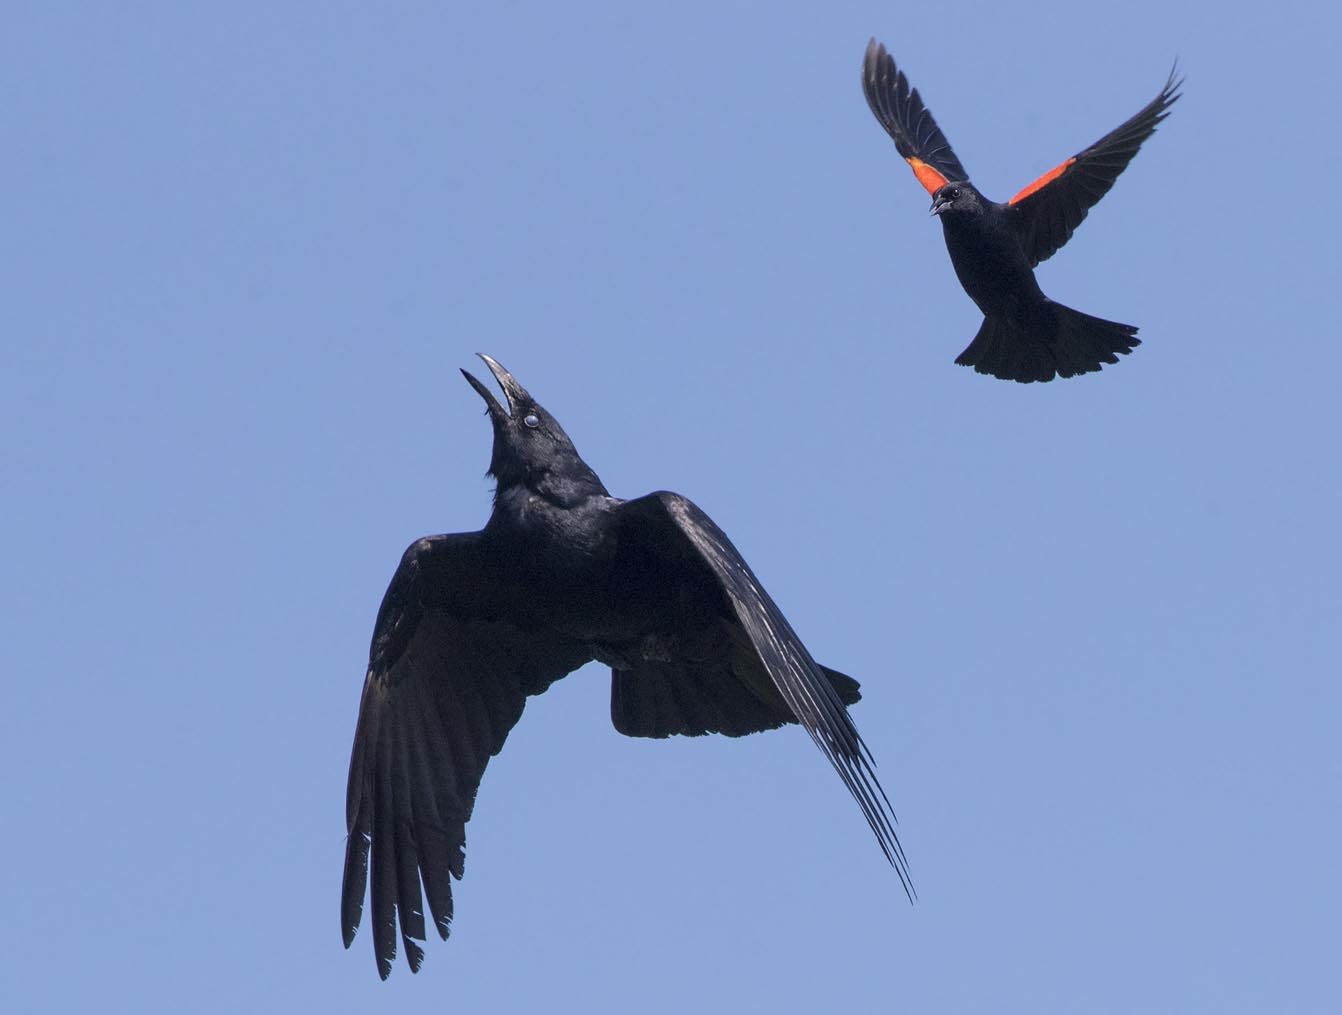 Crow and Redwing Blackbird 0742s